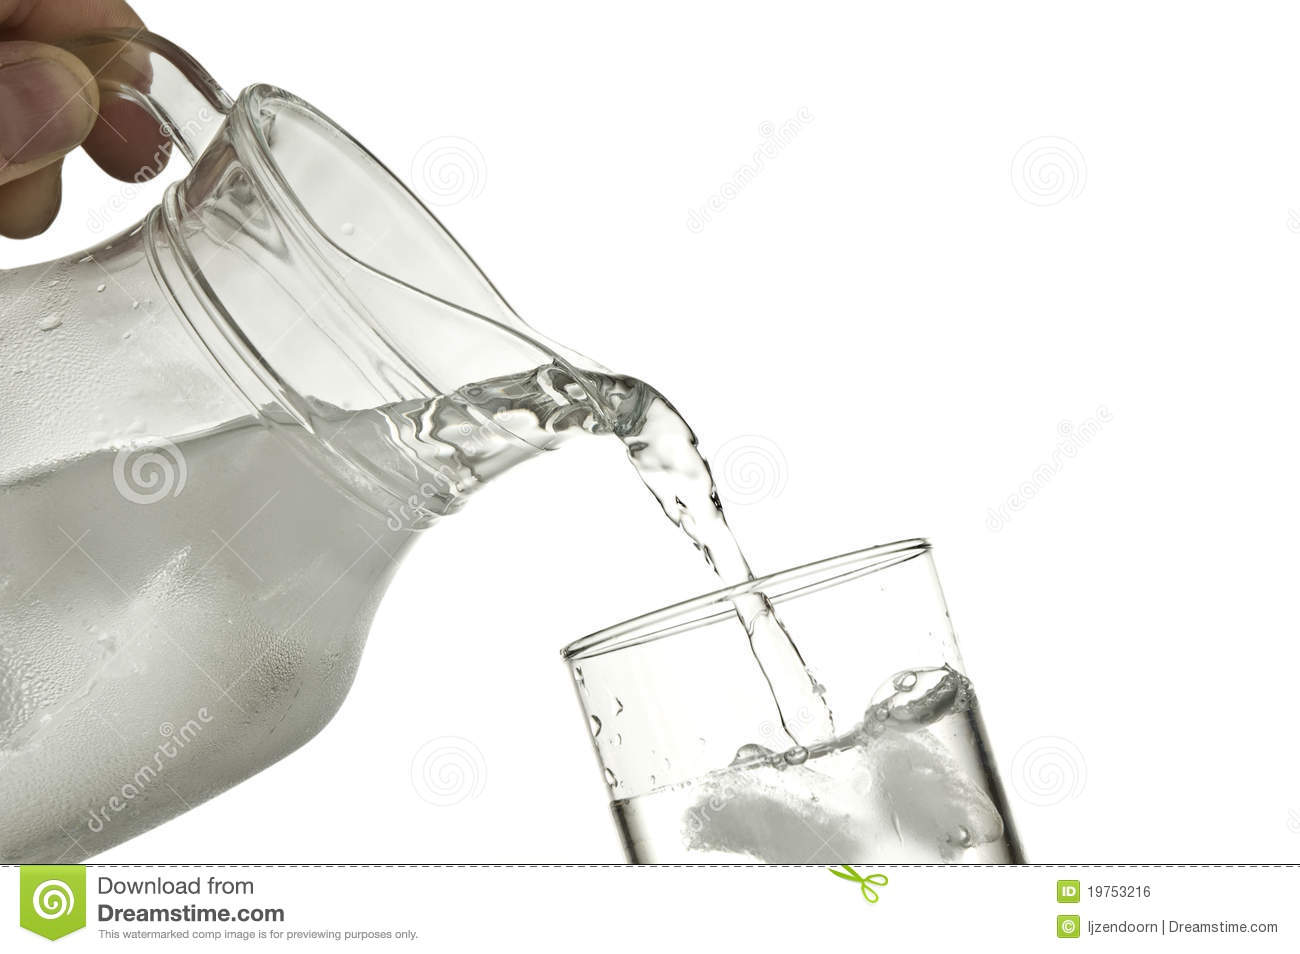 Water Pitcher Royalty Free Stock Image   Image  19753216